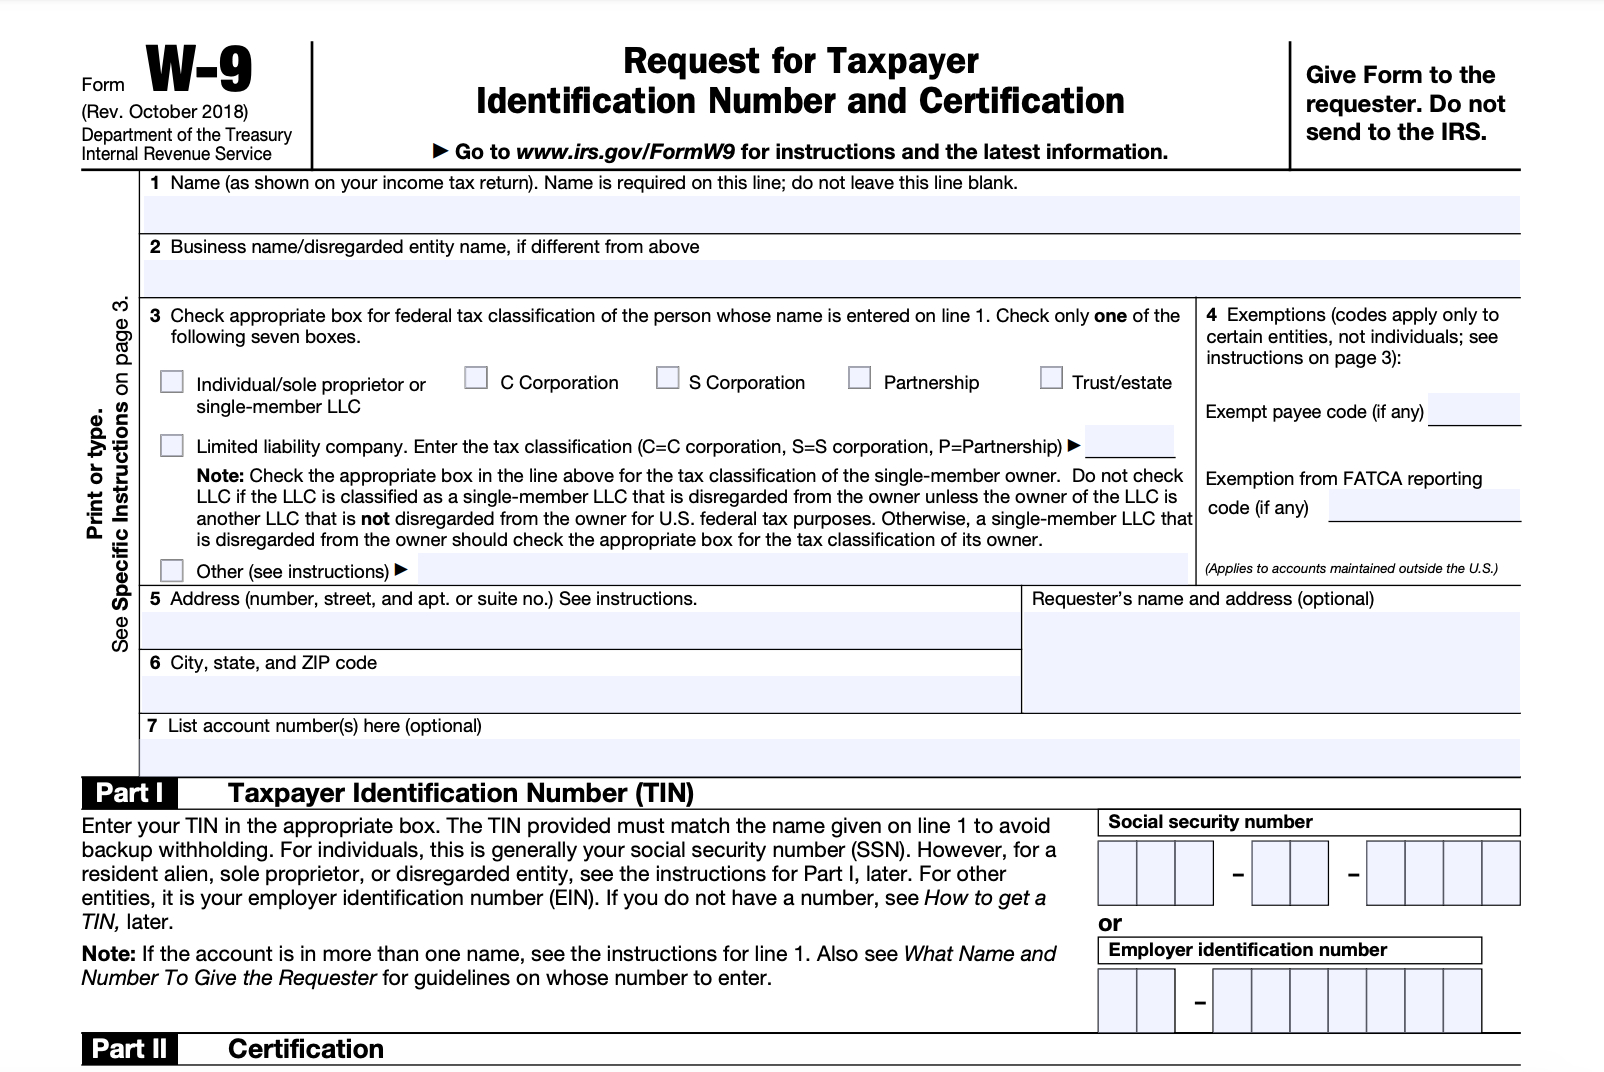 W-9 Form - Fill Out The Irs W-9 Form Online For 2019 | Smallpdf